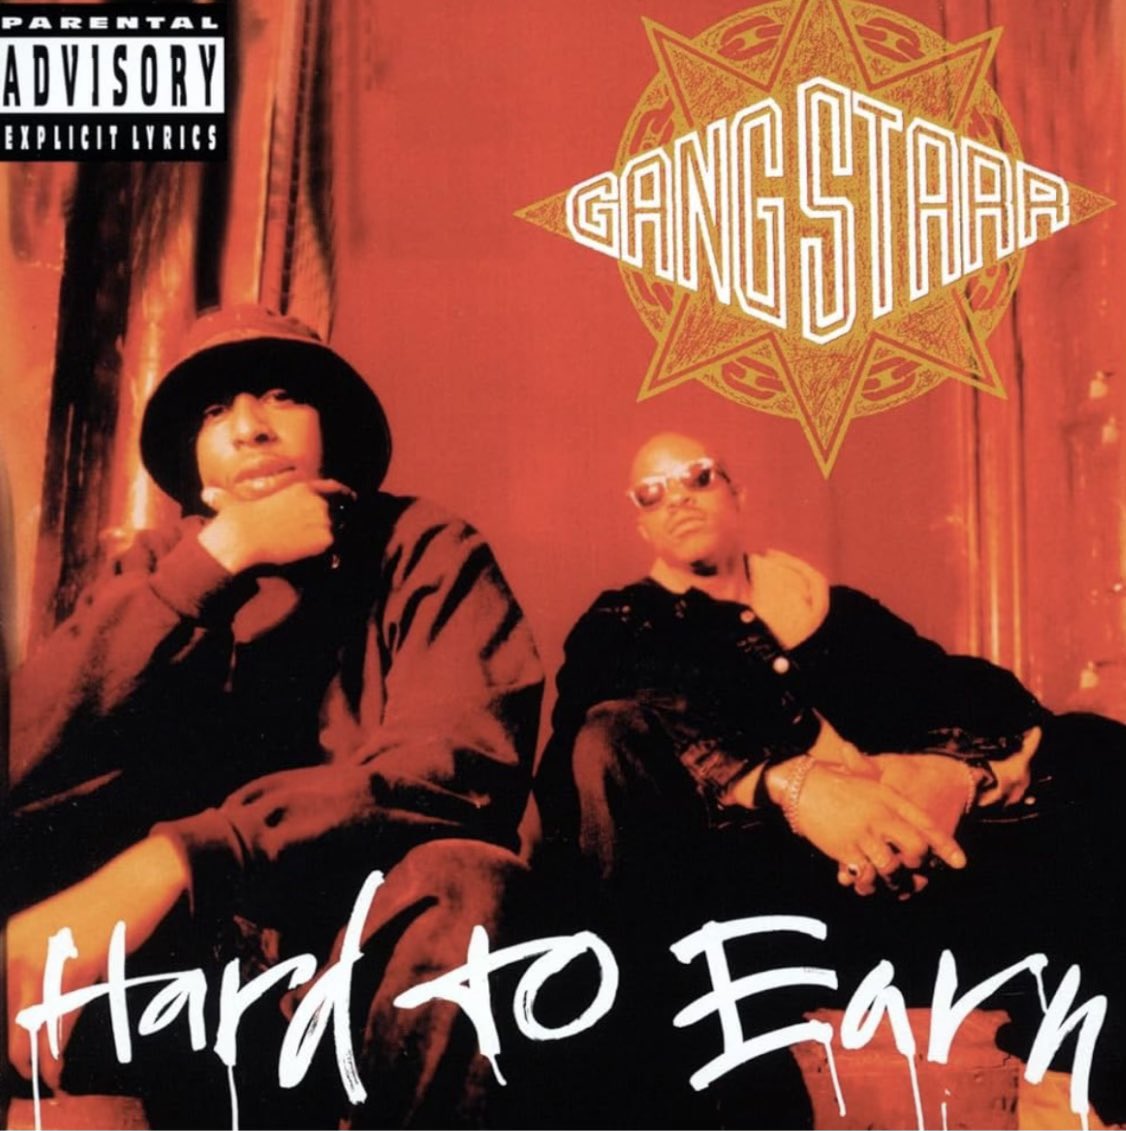 Salute 30 years the legacy continues hard to earn GANG STARR !!!